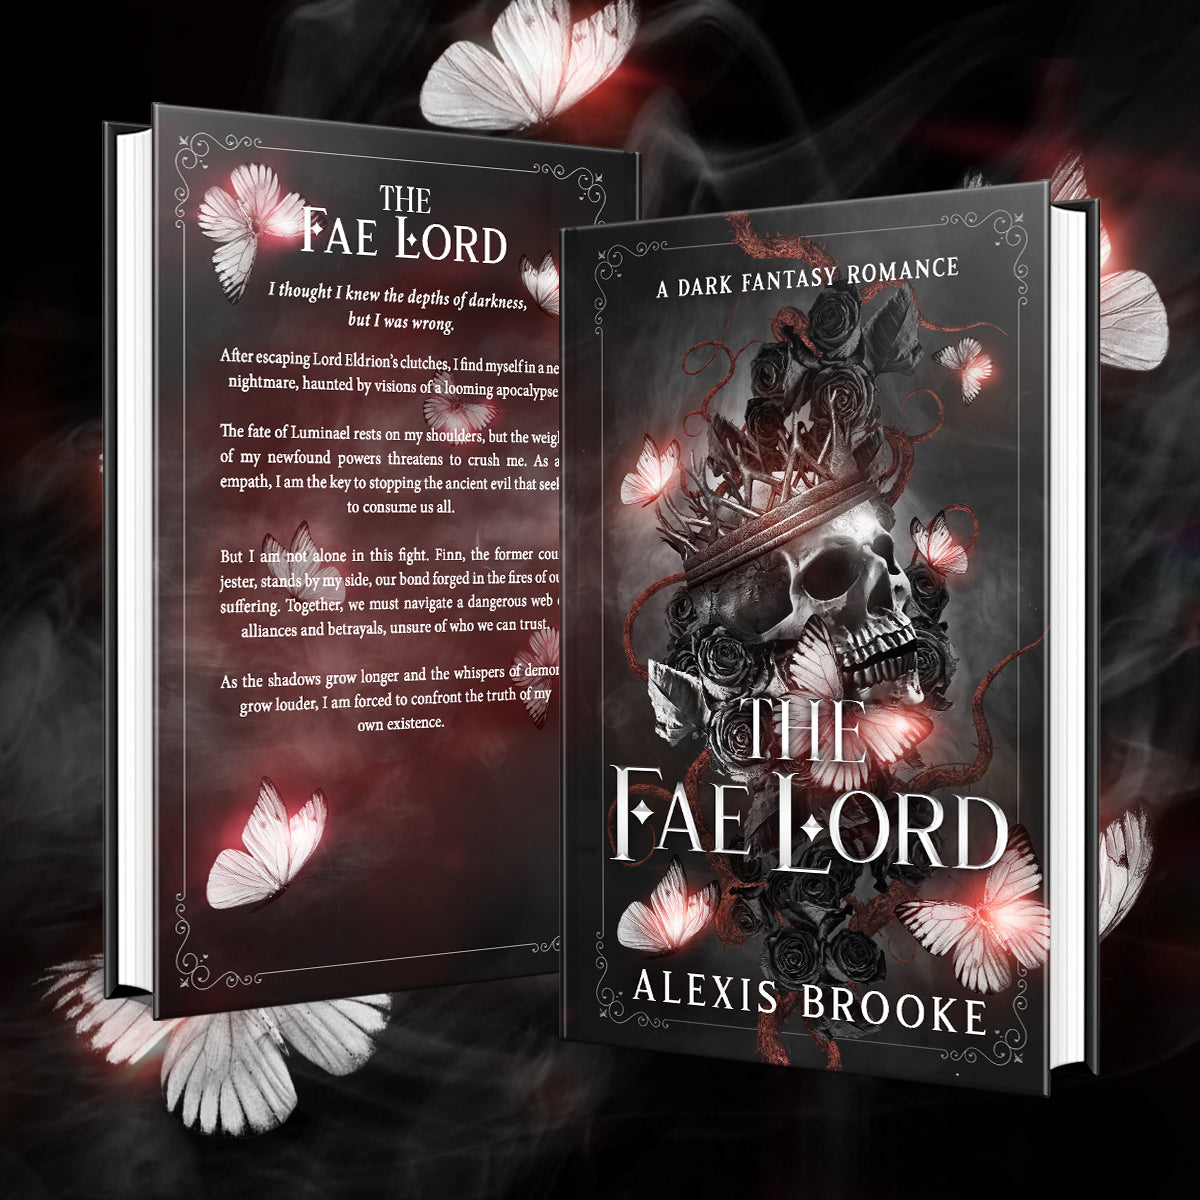 The Fae Lord